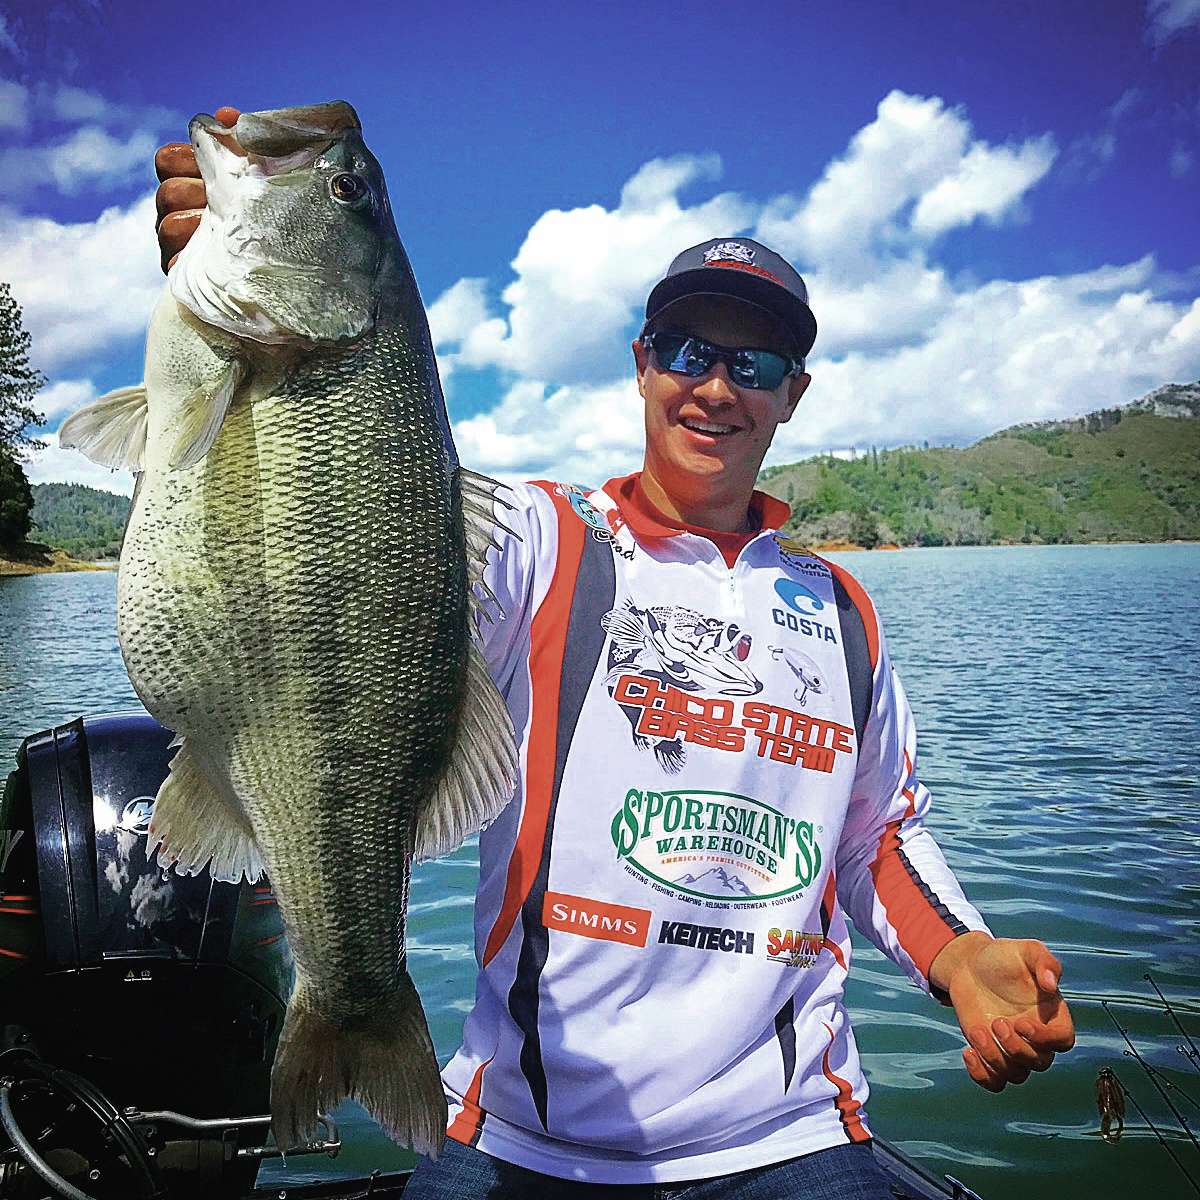 The team's 18-pound limit was the largest of the tournament.